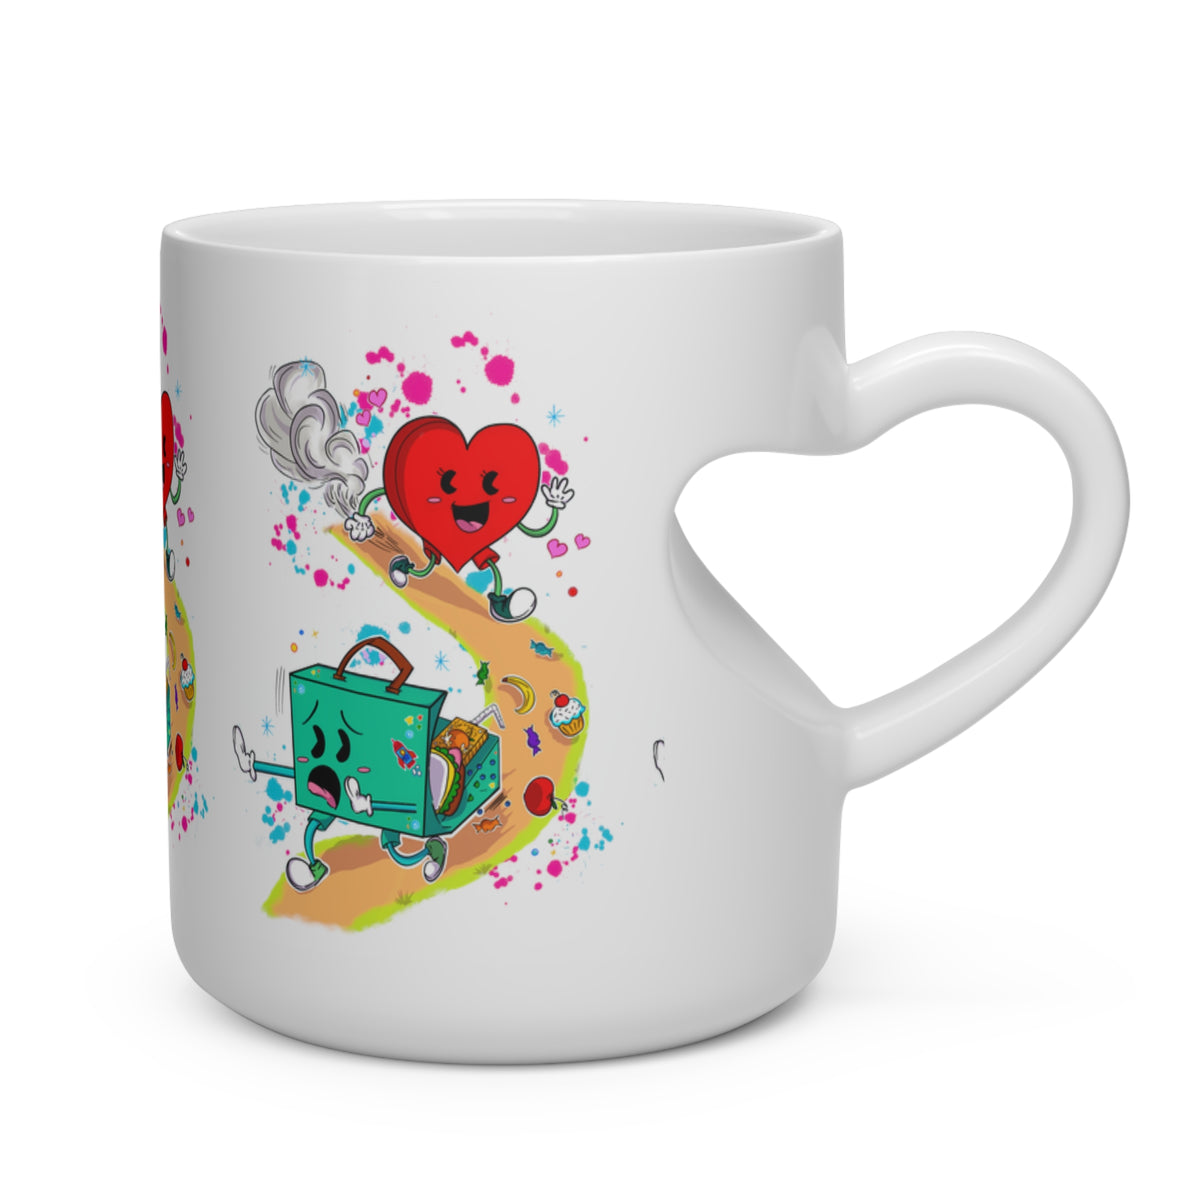 "The Heart Knows what it Wants" Heart Shaped Mug